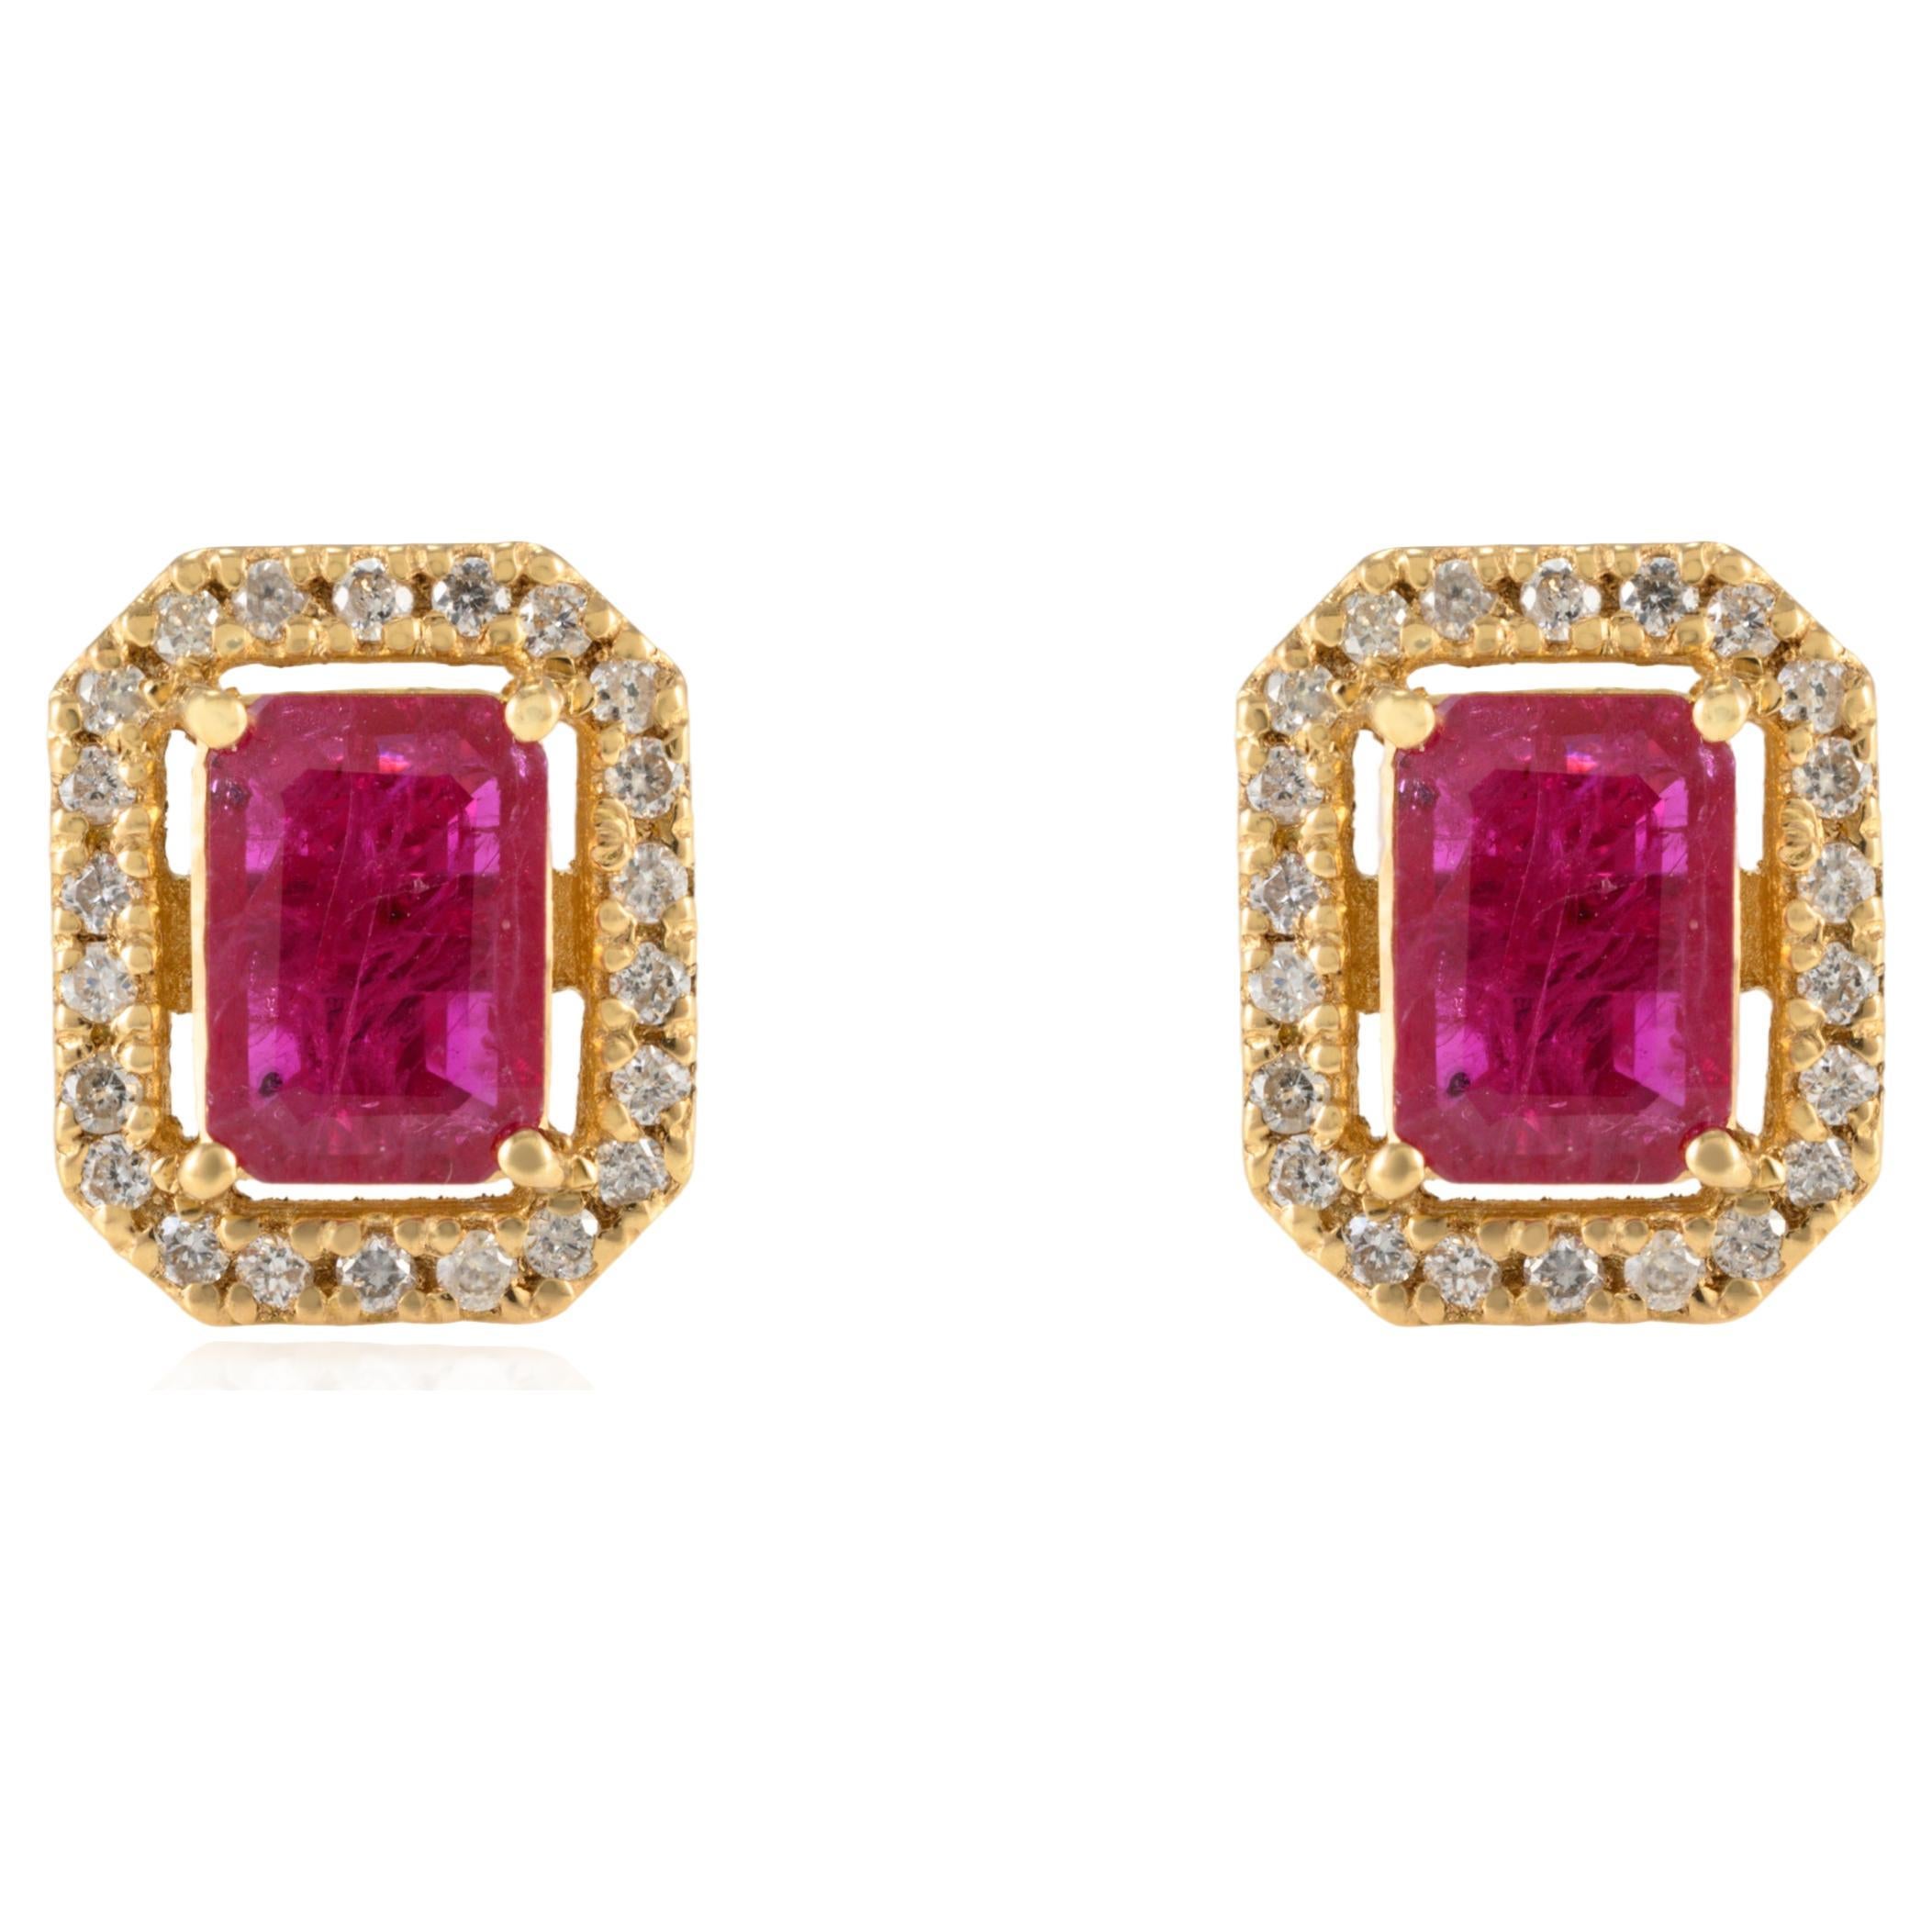 Ruby Halo Diamond Stud Earrings in 18k Solid Yellow Gold Gift For Her For Sale